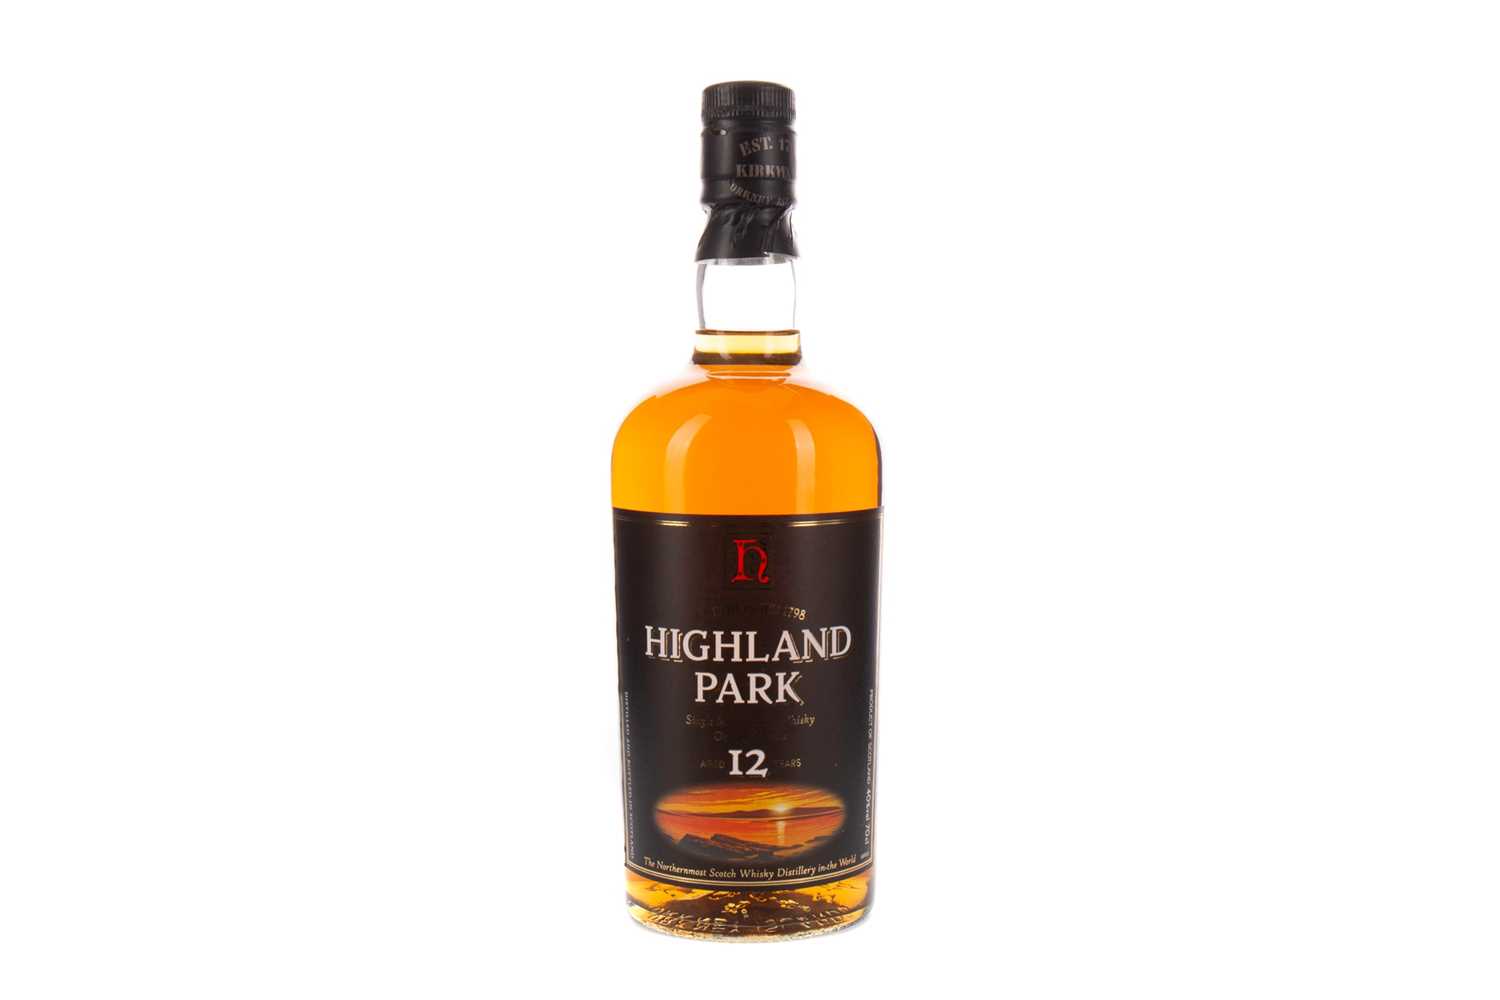 Lot 261 - HIGHLAND PARK AGED 12 YEARS